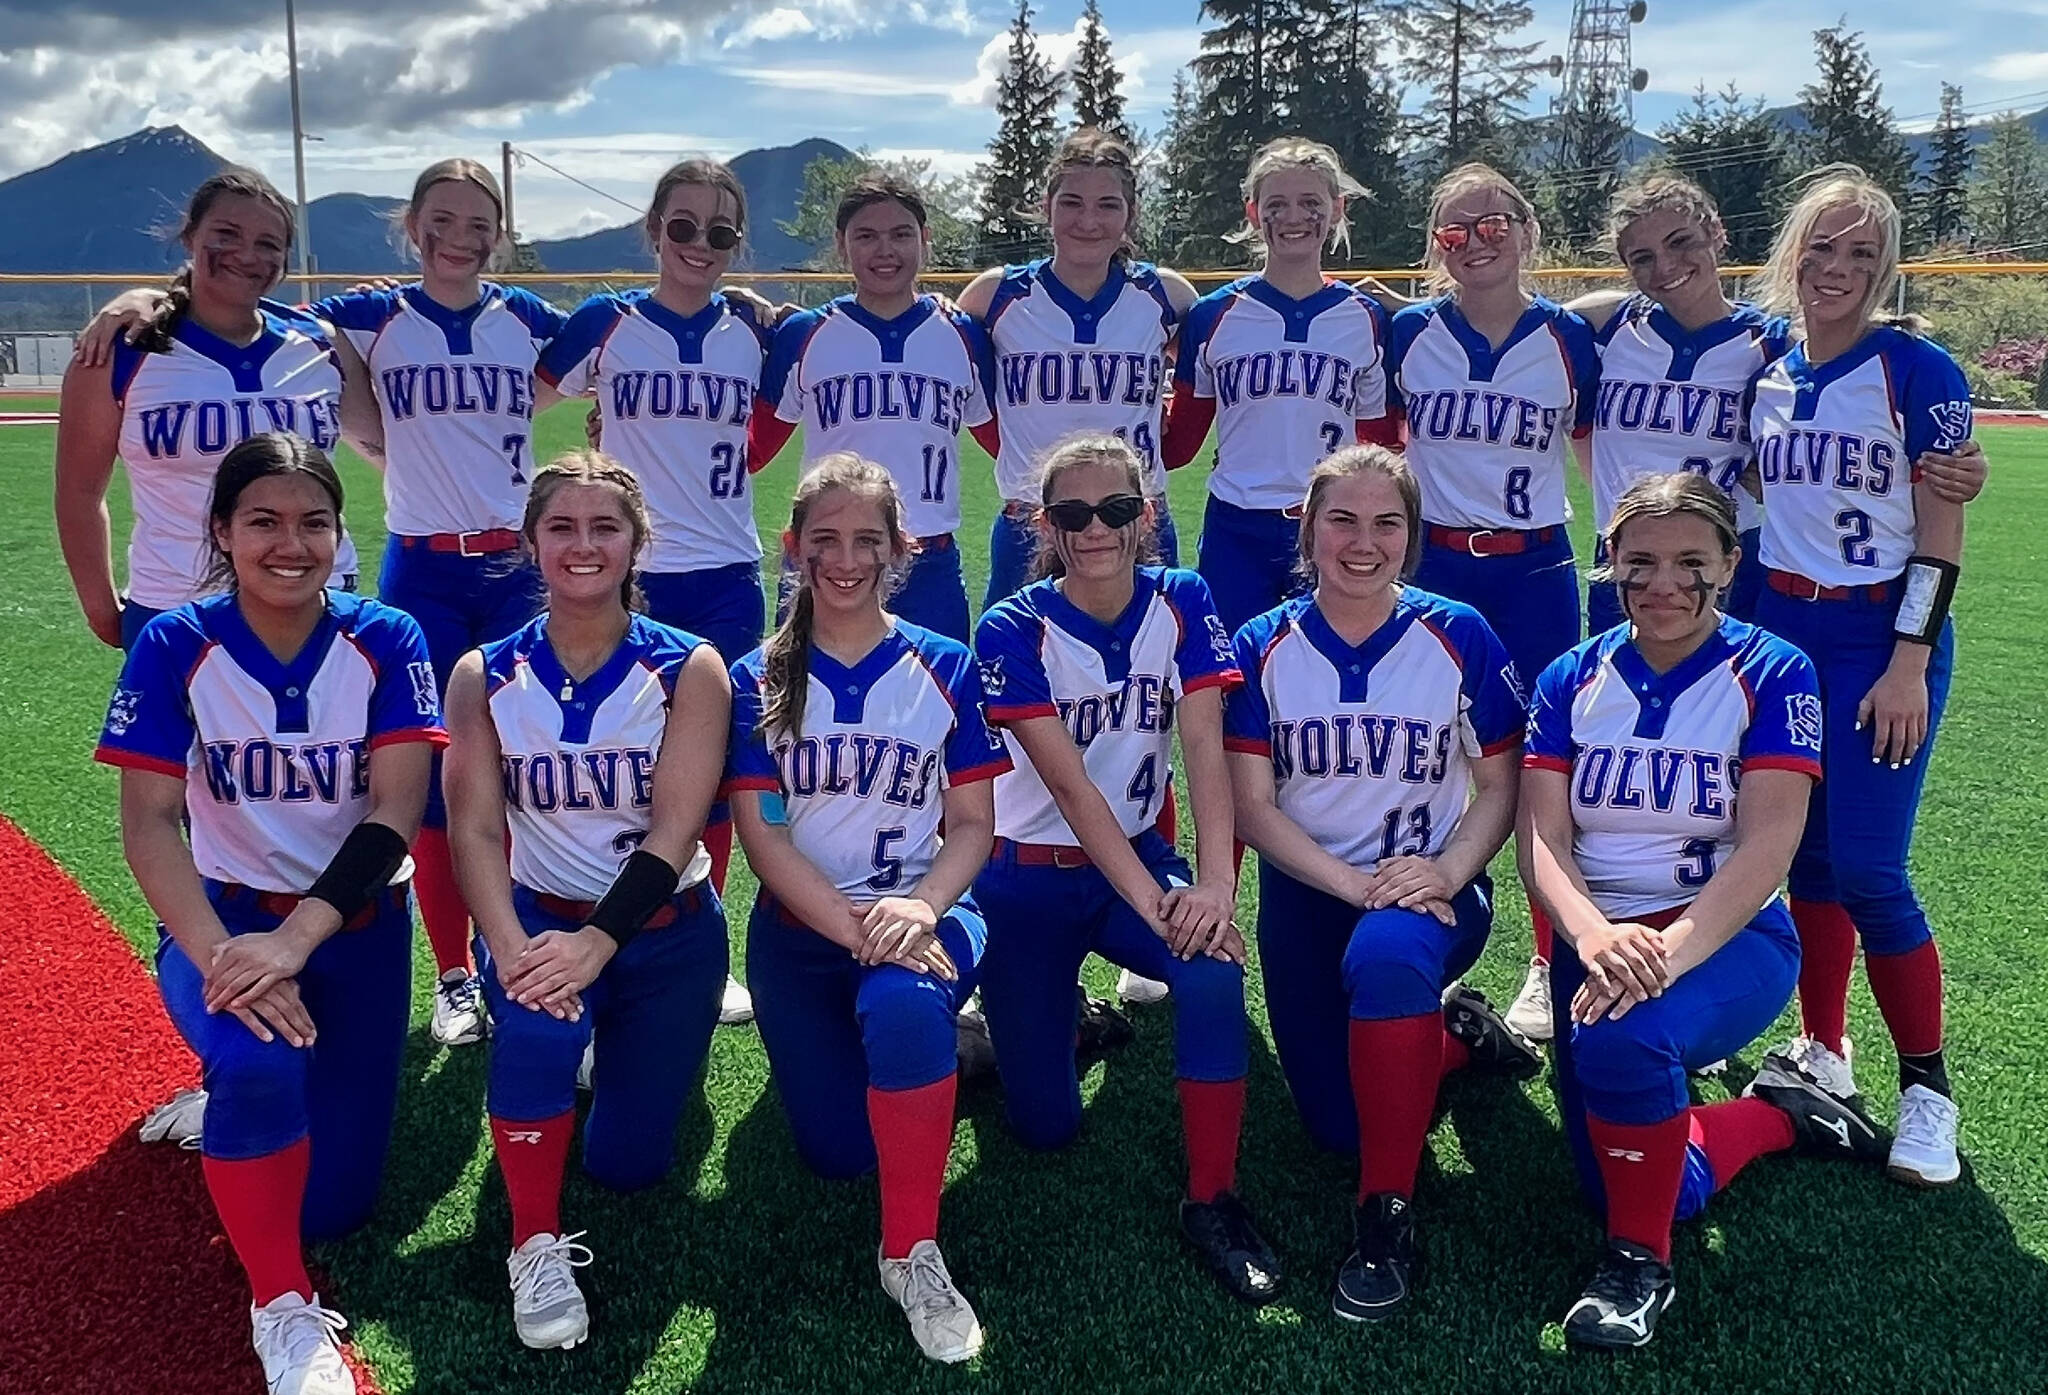 The Sitka Lady Wolves are the Southeast second seed for the state tournament in Anchorage this weekend. Back row left to right: Harlee Nelson, Kaelynn Balovich, Kayaani Weathers, Kaleena Tucker, Dalila Callahan, Kaiya Balovich, Sadie Saline, Leia Daly and Adriana Denkinger. Front row left to right: Ally Mayville, Macee Steinson, Alina Lebahn, Naia Nelson, Michele Winger and Madison Campbell. (Photo courtesy Sitka Softball)